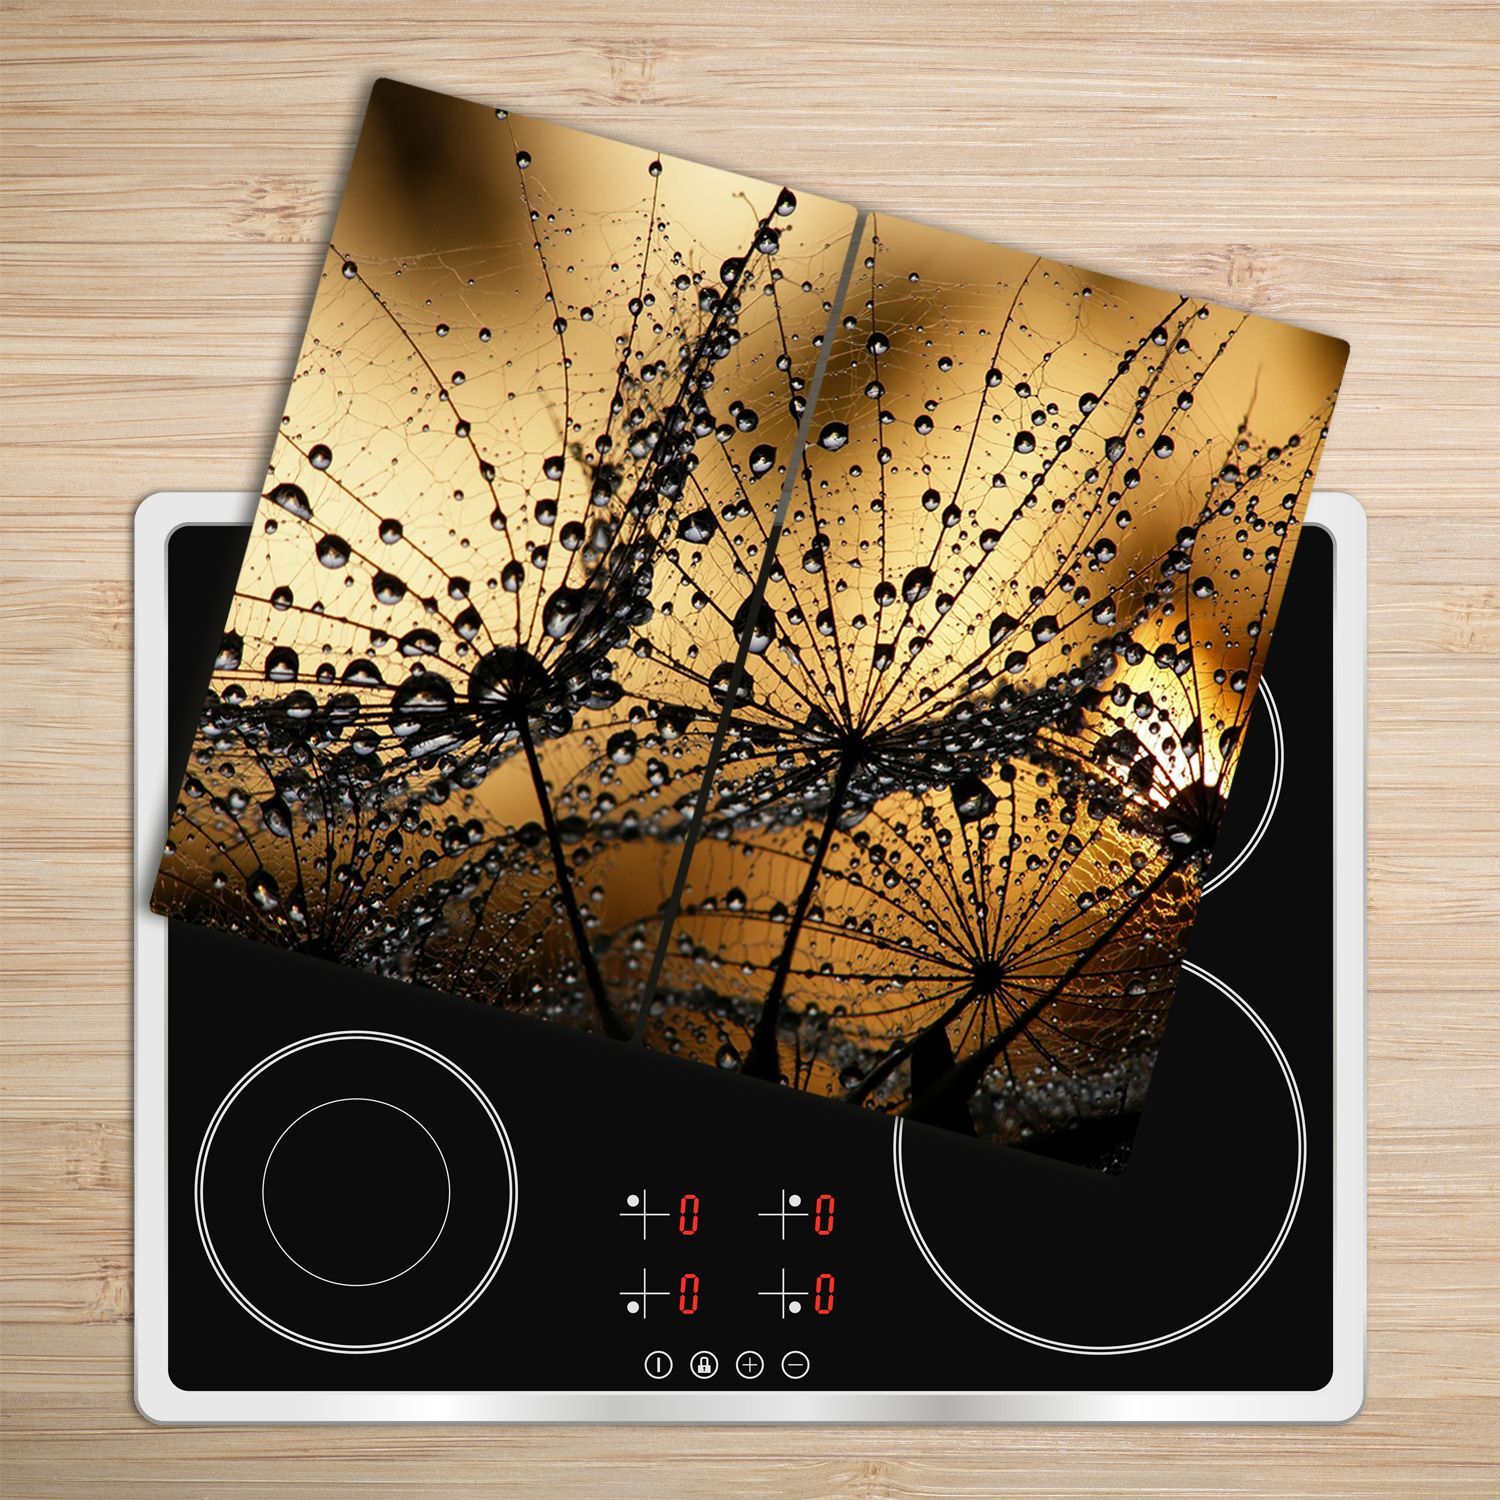 Spider's Web | Fall Wall Decor, Wall Decor Trends, Glass Chopping Board Inside Recent Web Wall Art (View 2 of 20)